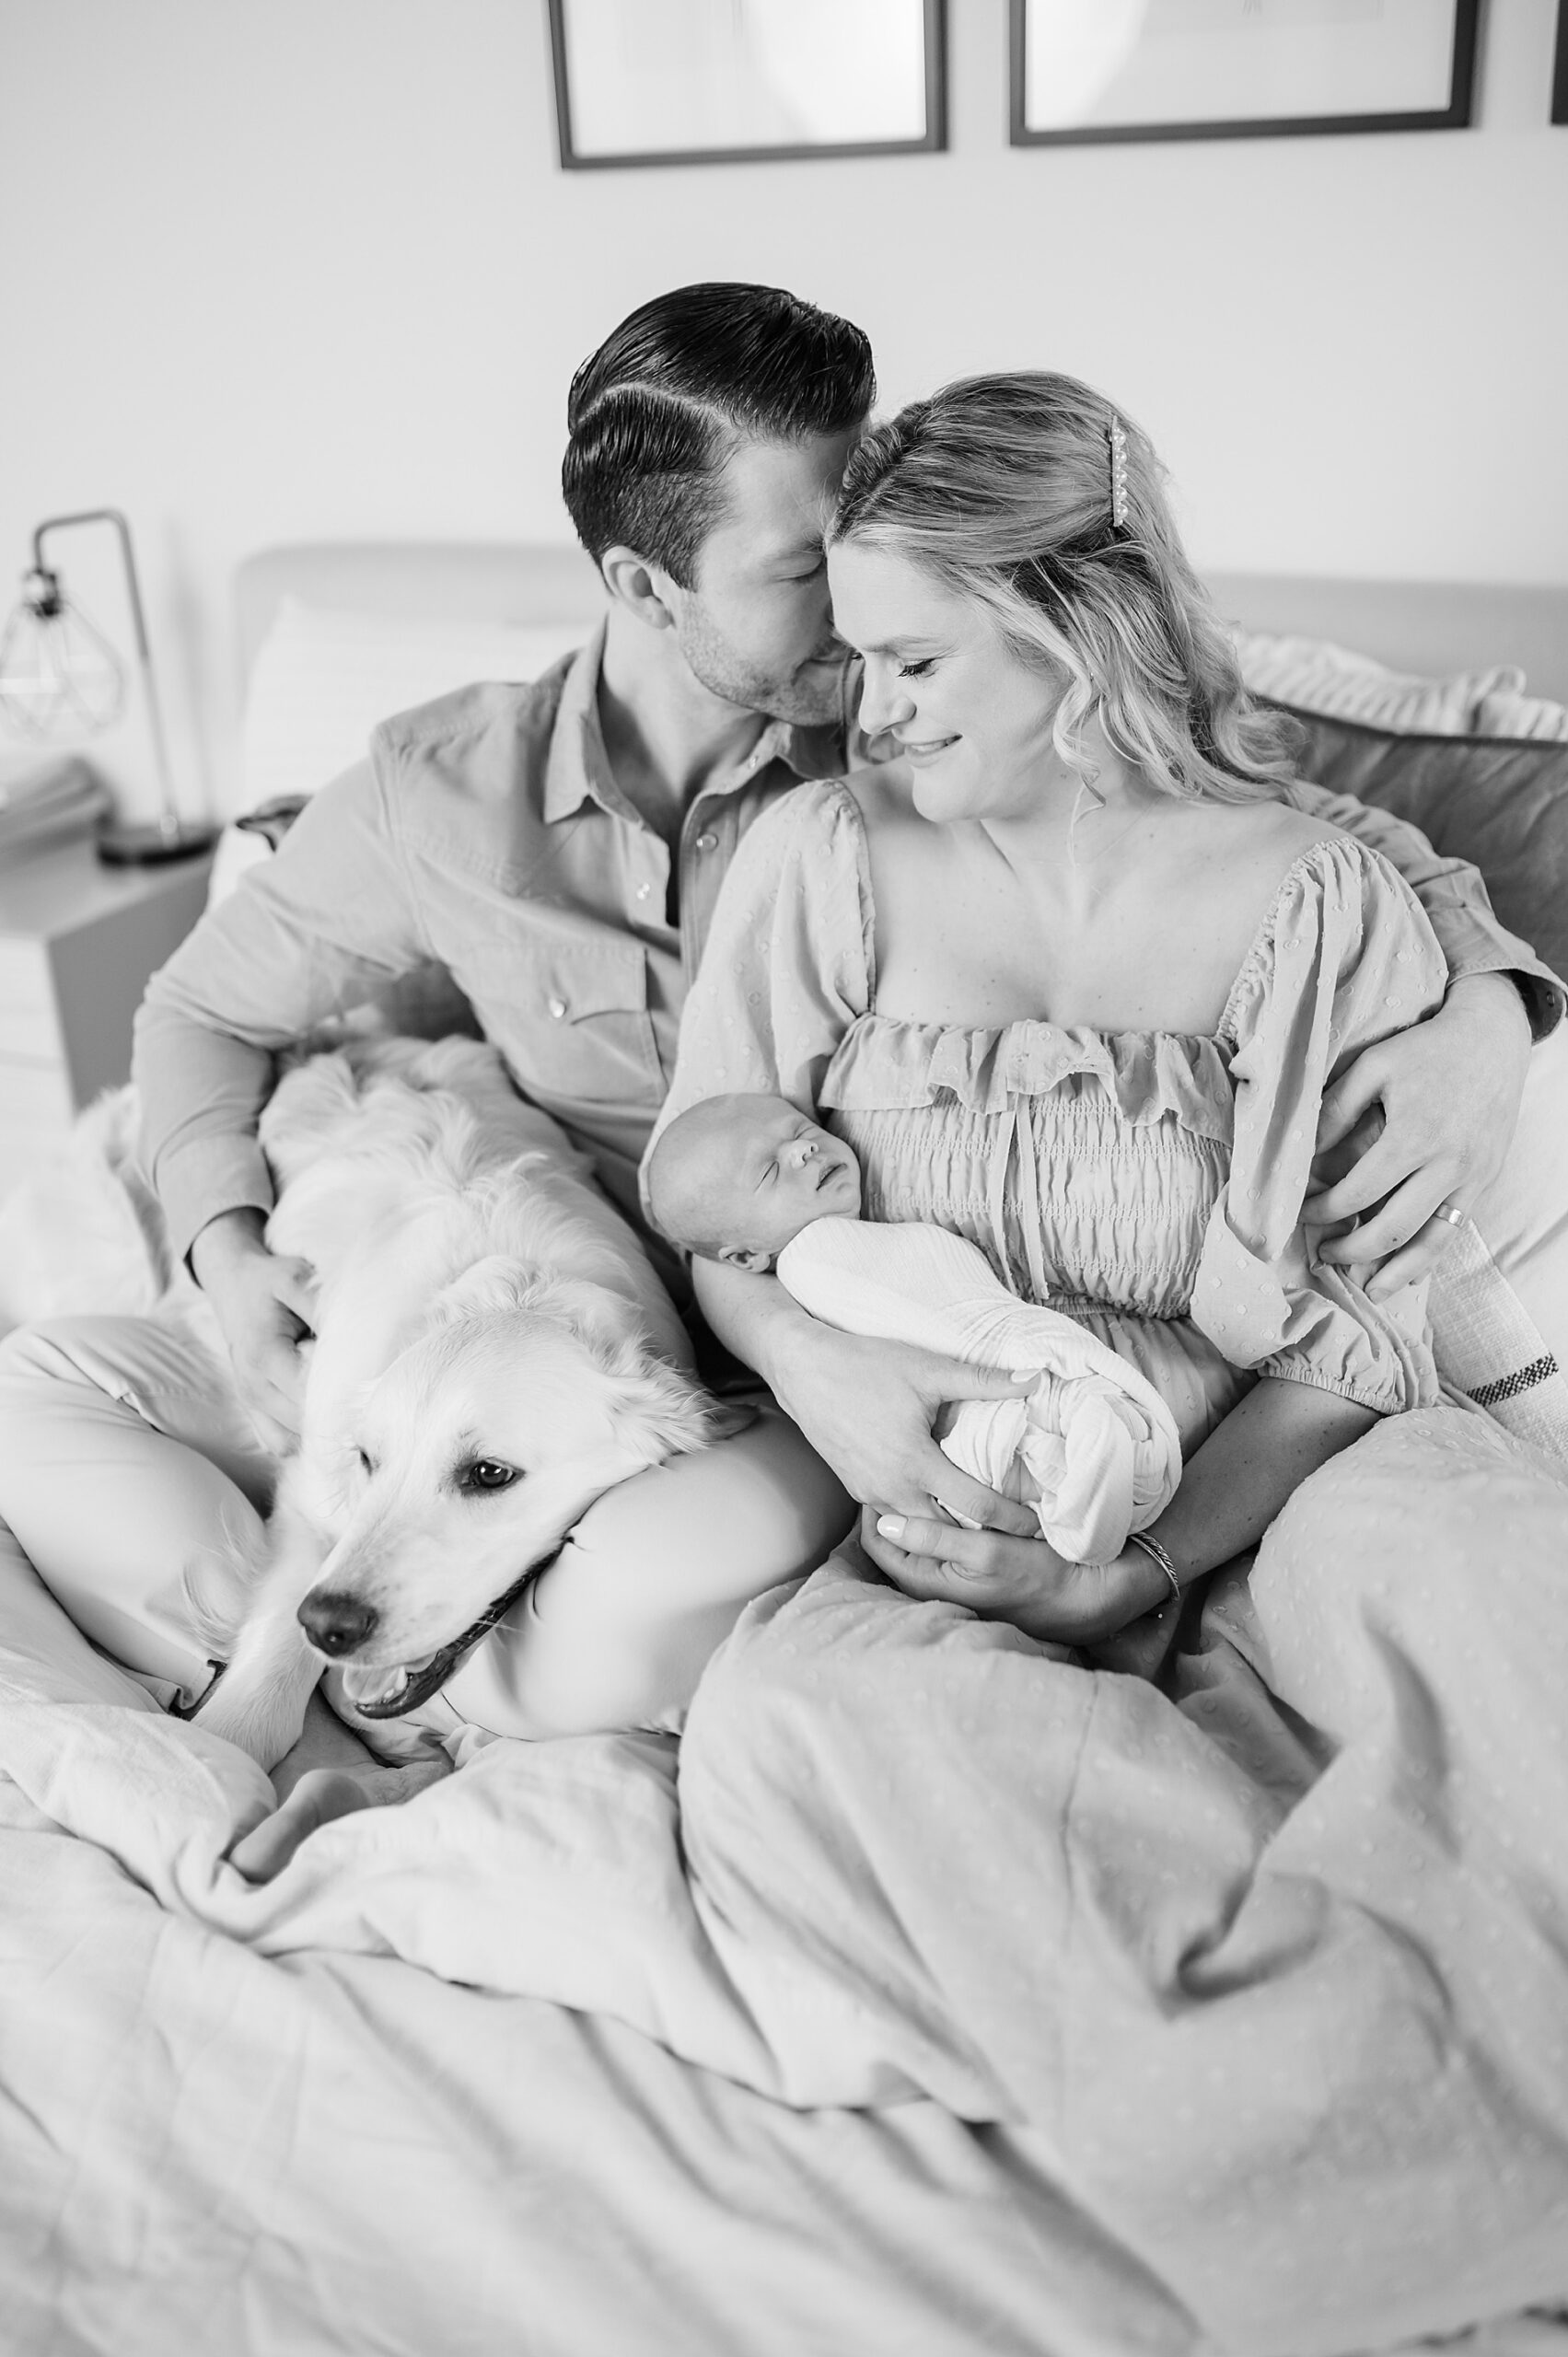 timeless family portaits of newborn and family photographed by Lindsey Dutton Photography, a Dallas Newborn photographer
